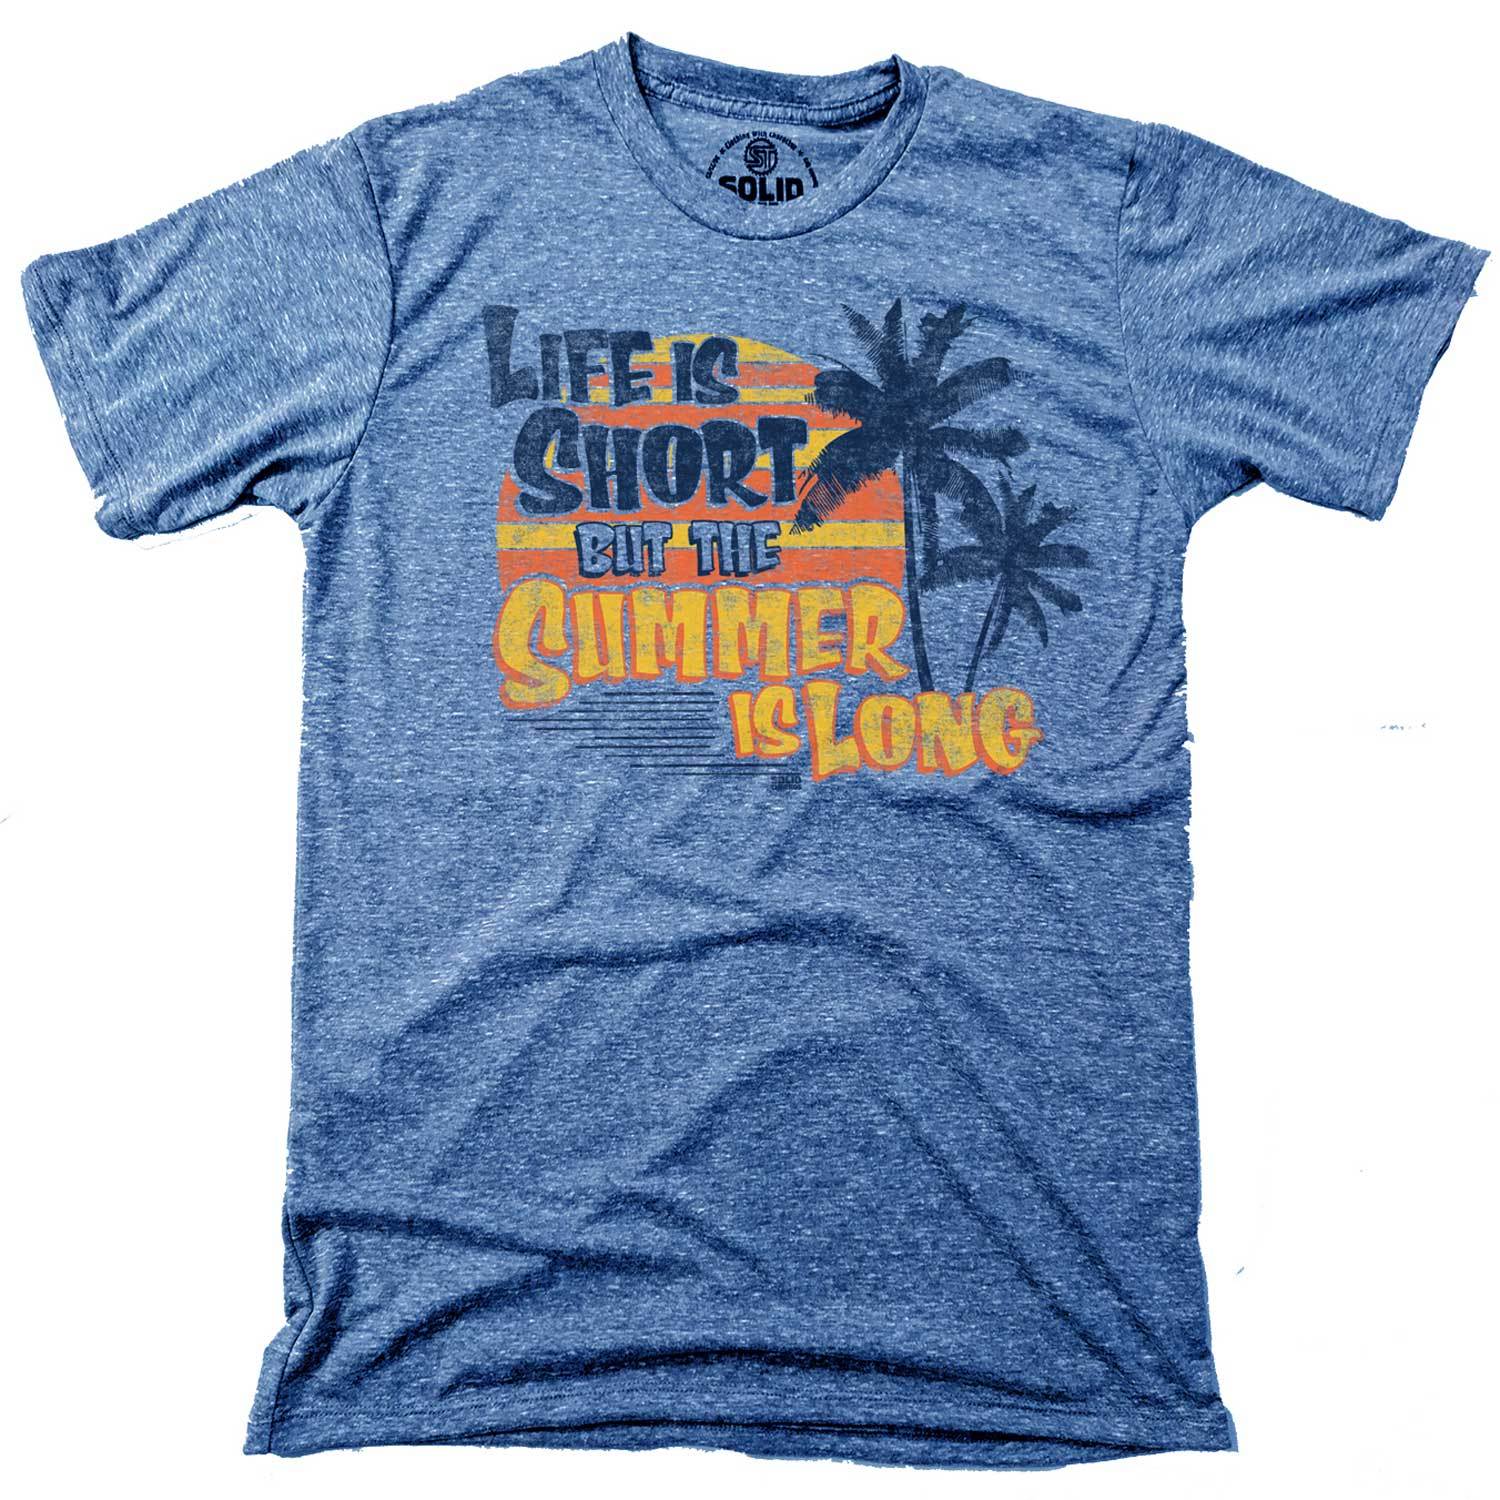 Men's Life is Short But the Summer is Long Vintage Inspired T-Shirt | Retro Beach Graphic Tee | Solid Threads